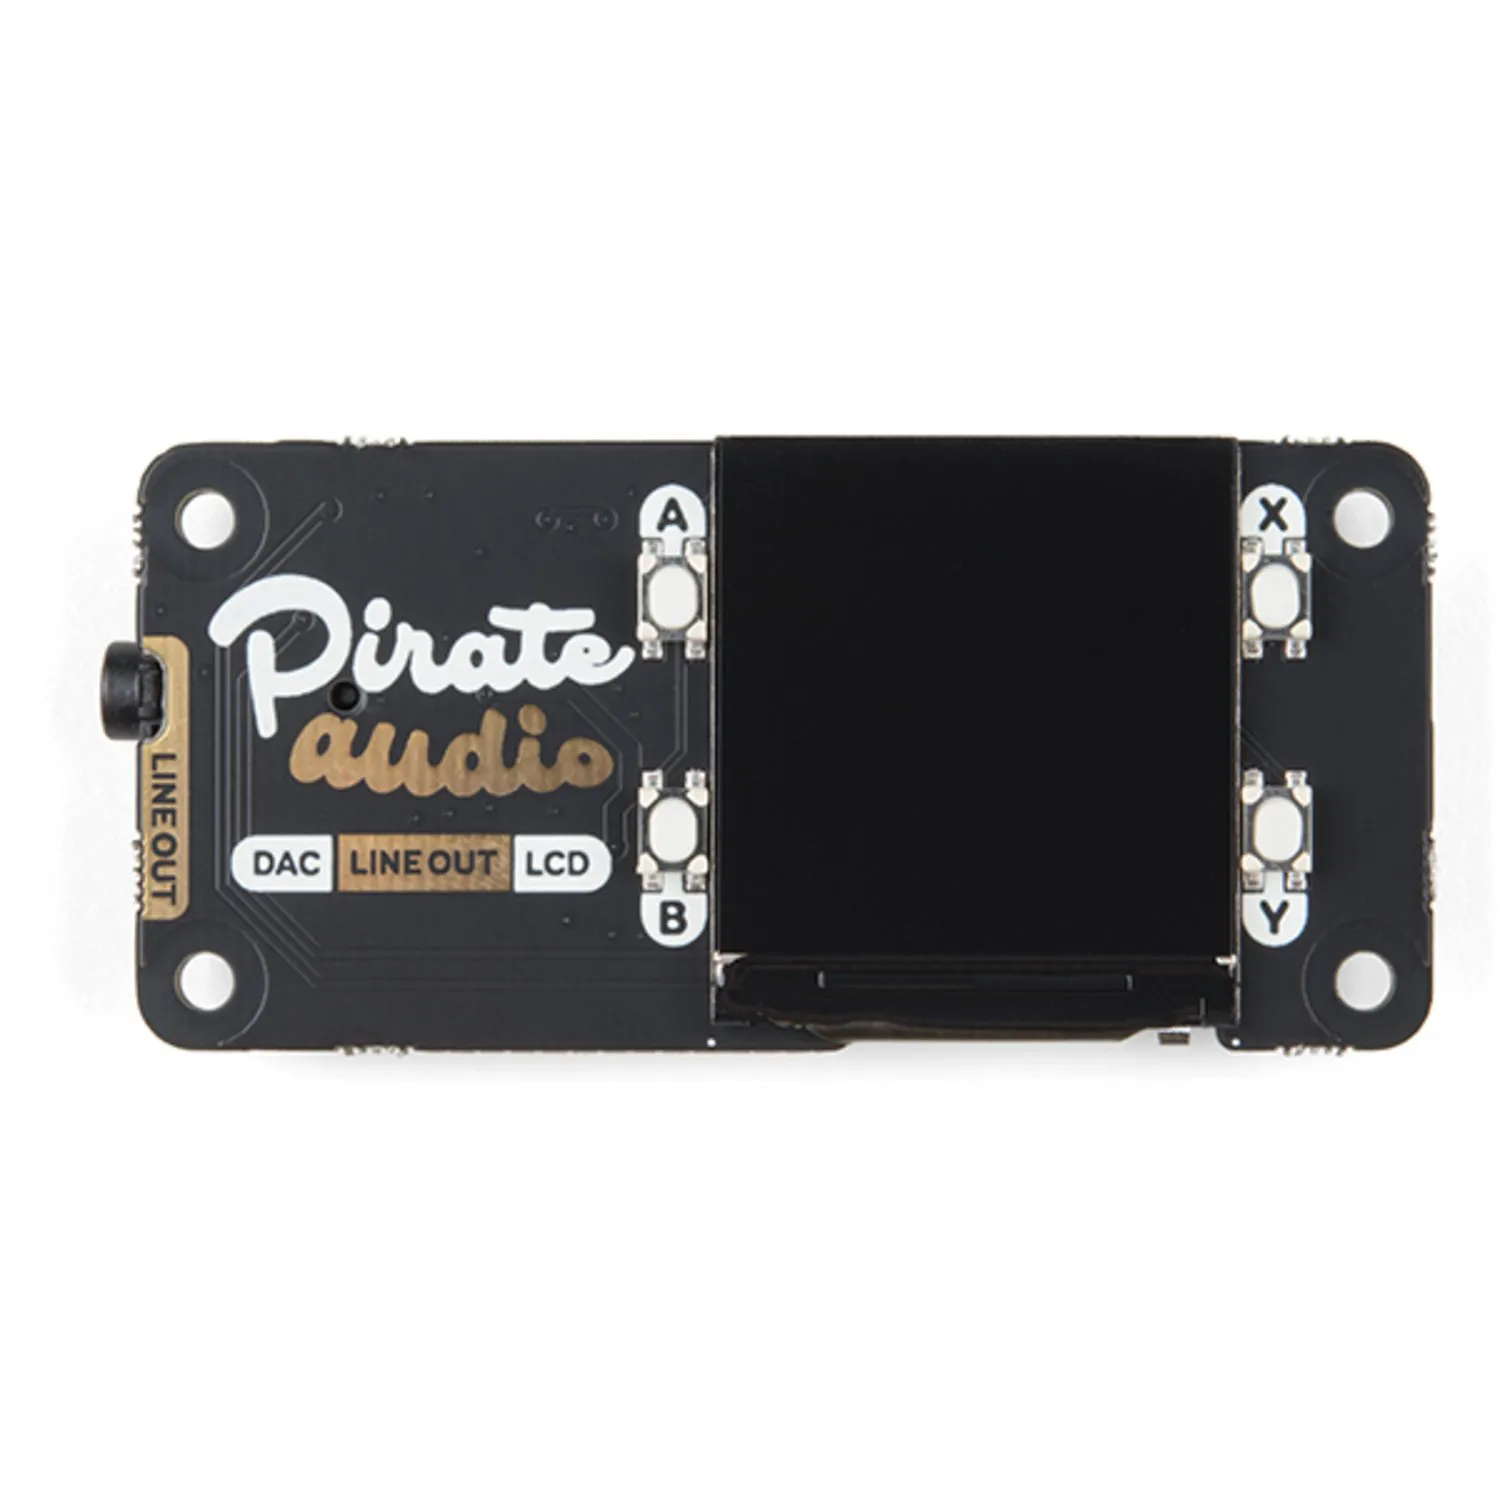 Photo of Pimoroni Pirate Audio Line-Out for Raspberry Pi